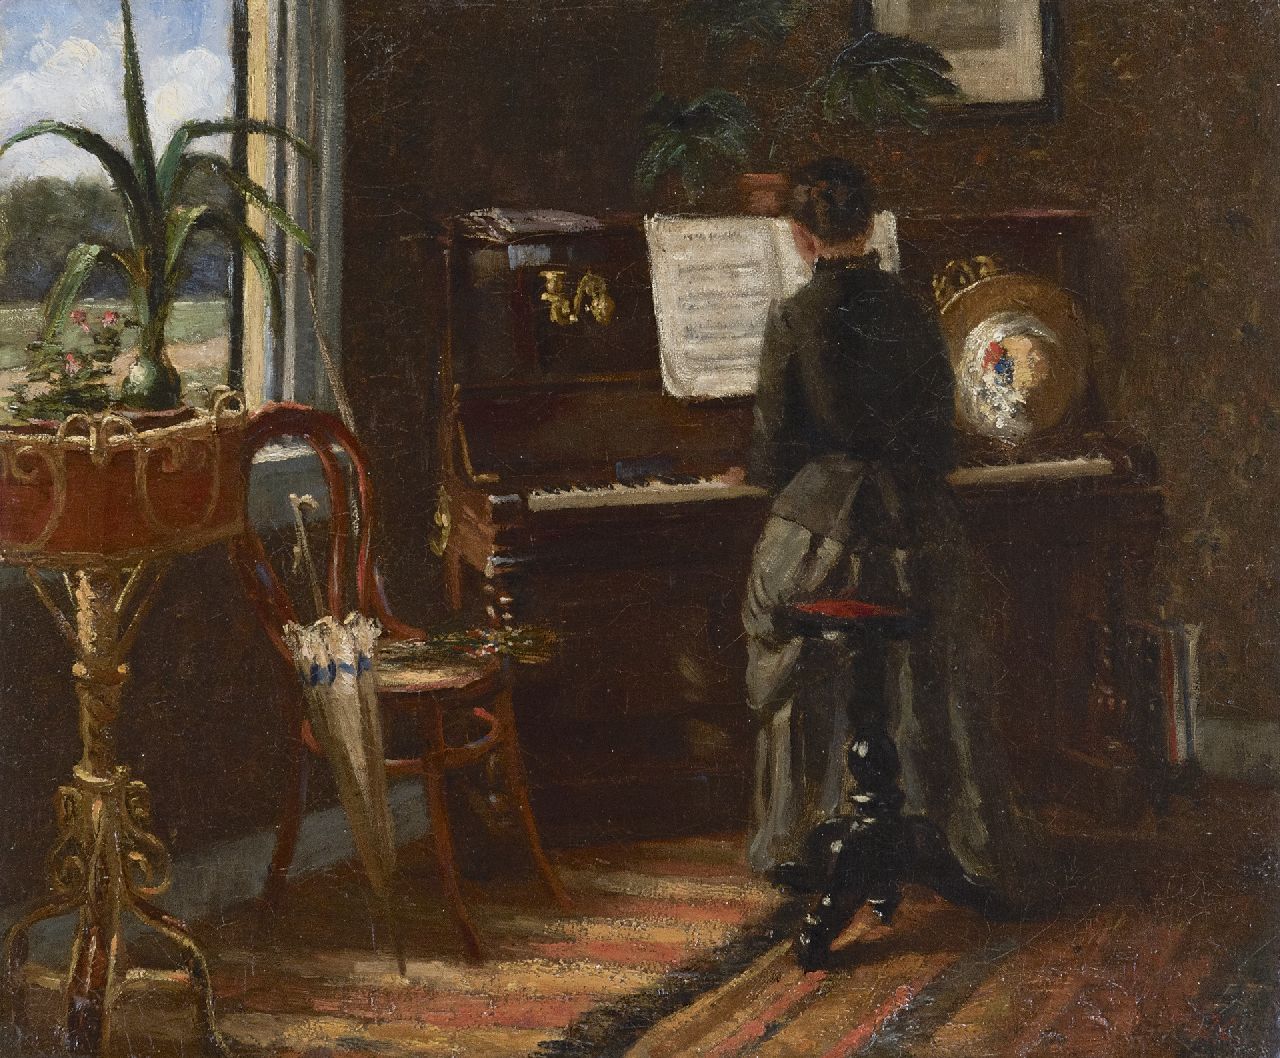 Geerlings J.H.  | Jacob Hendrik Geerlings, At the piano, oil on canvas 37.6 x 45.3 cm, signed l.r. with initials